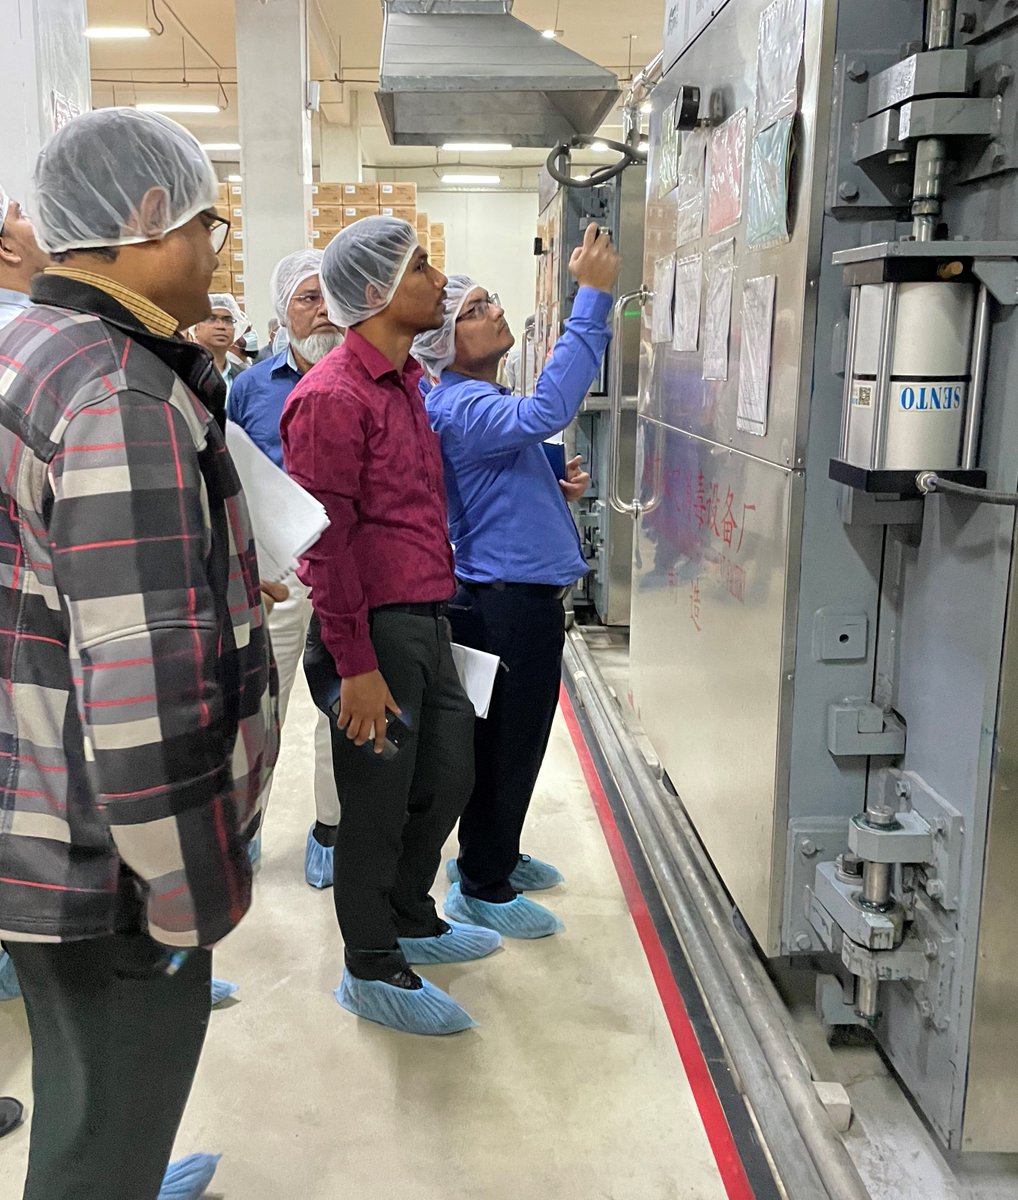 .@USAIDGH-funded PQM+ builds manufacturers' capacity to attain international accreditation, leading to stronger #HealthSystems that assure quality medical products. Staff from @DGDA_Bangladesh took part in a training on GMP audit inspection at @niprojmi2012 in #Bangladesh.